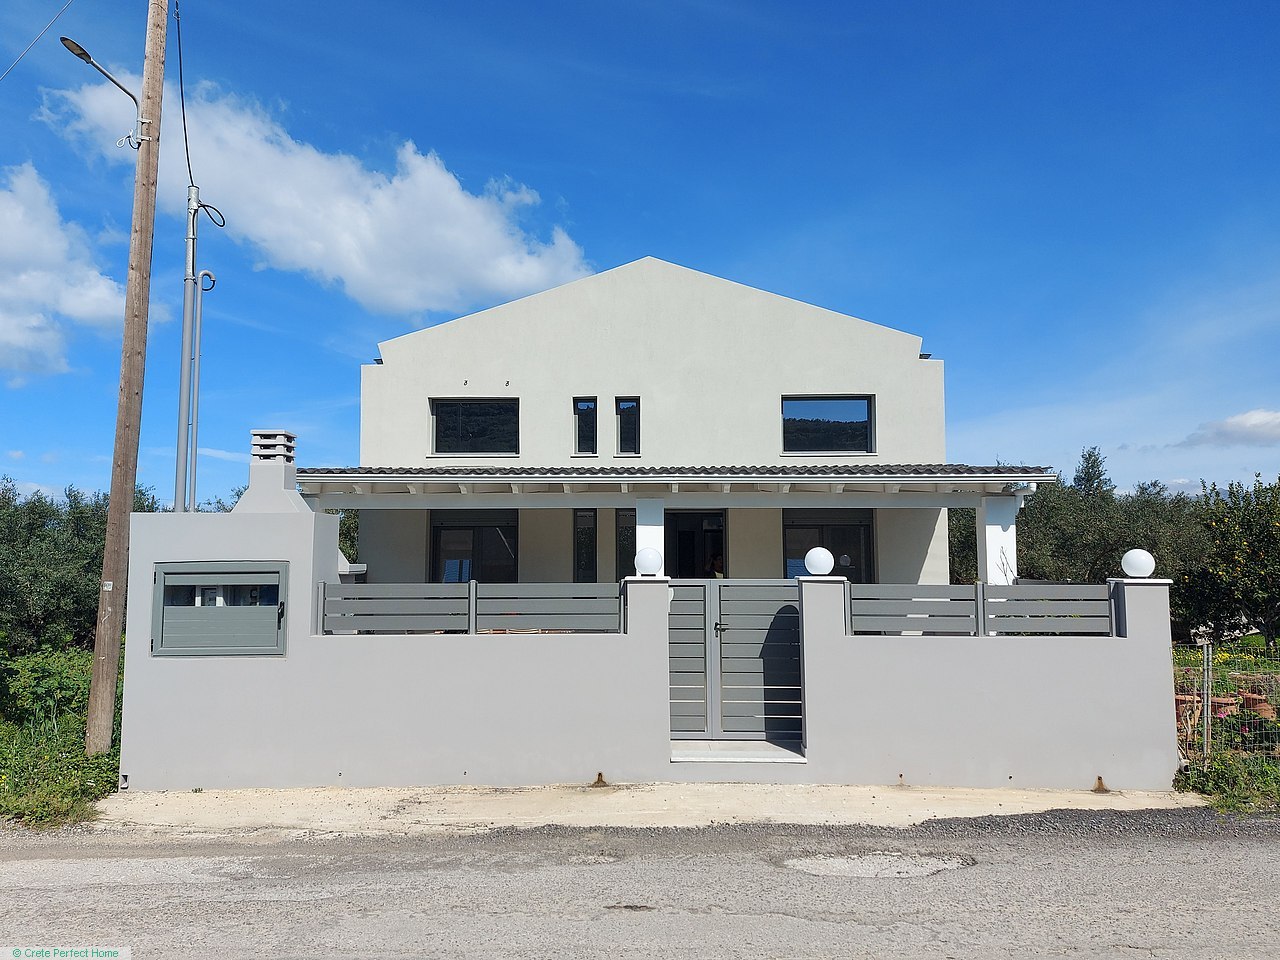 Just-built 123m2 deluxe 4-bed house, large plot, 1500m beaches, second plot available